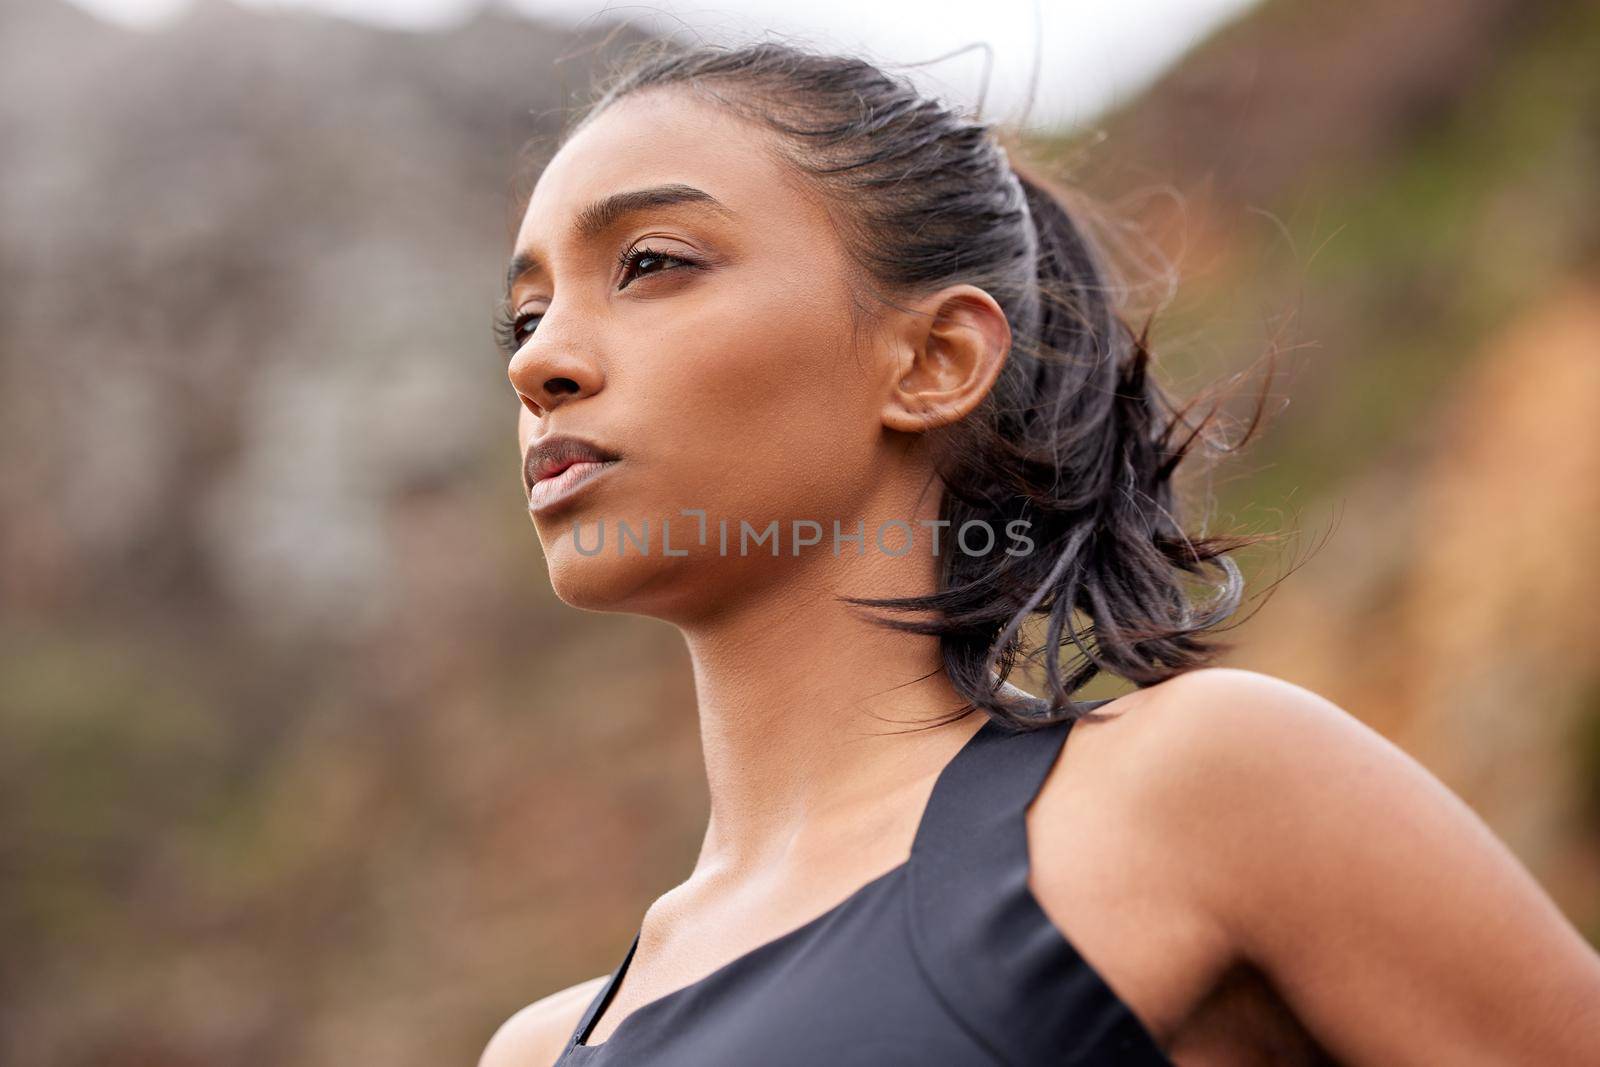 Shot of a fit young woman catching her breathe while completing her jog outdoors.